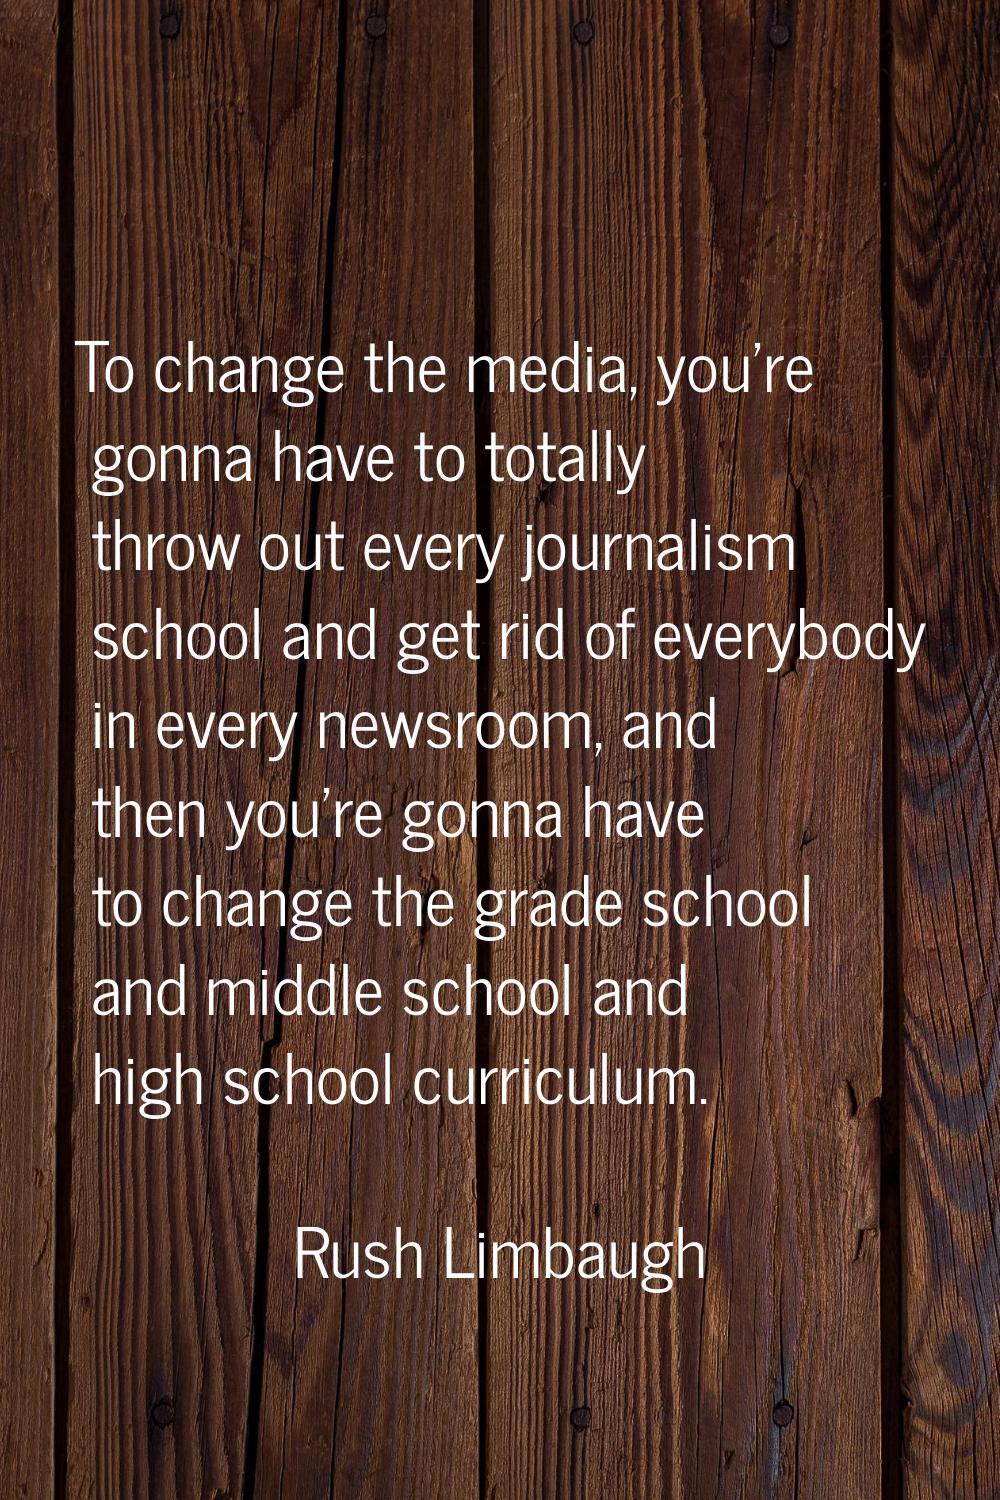 To change the media, you're gonna have to totally throw out every journalism school and get rid of 